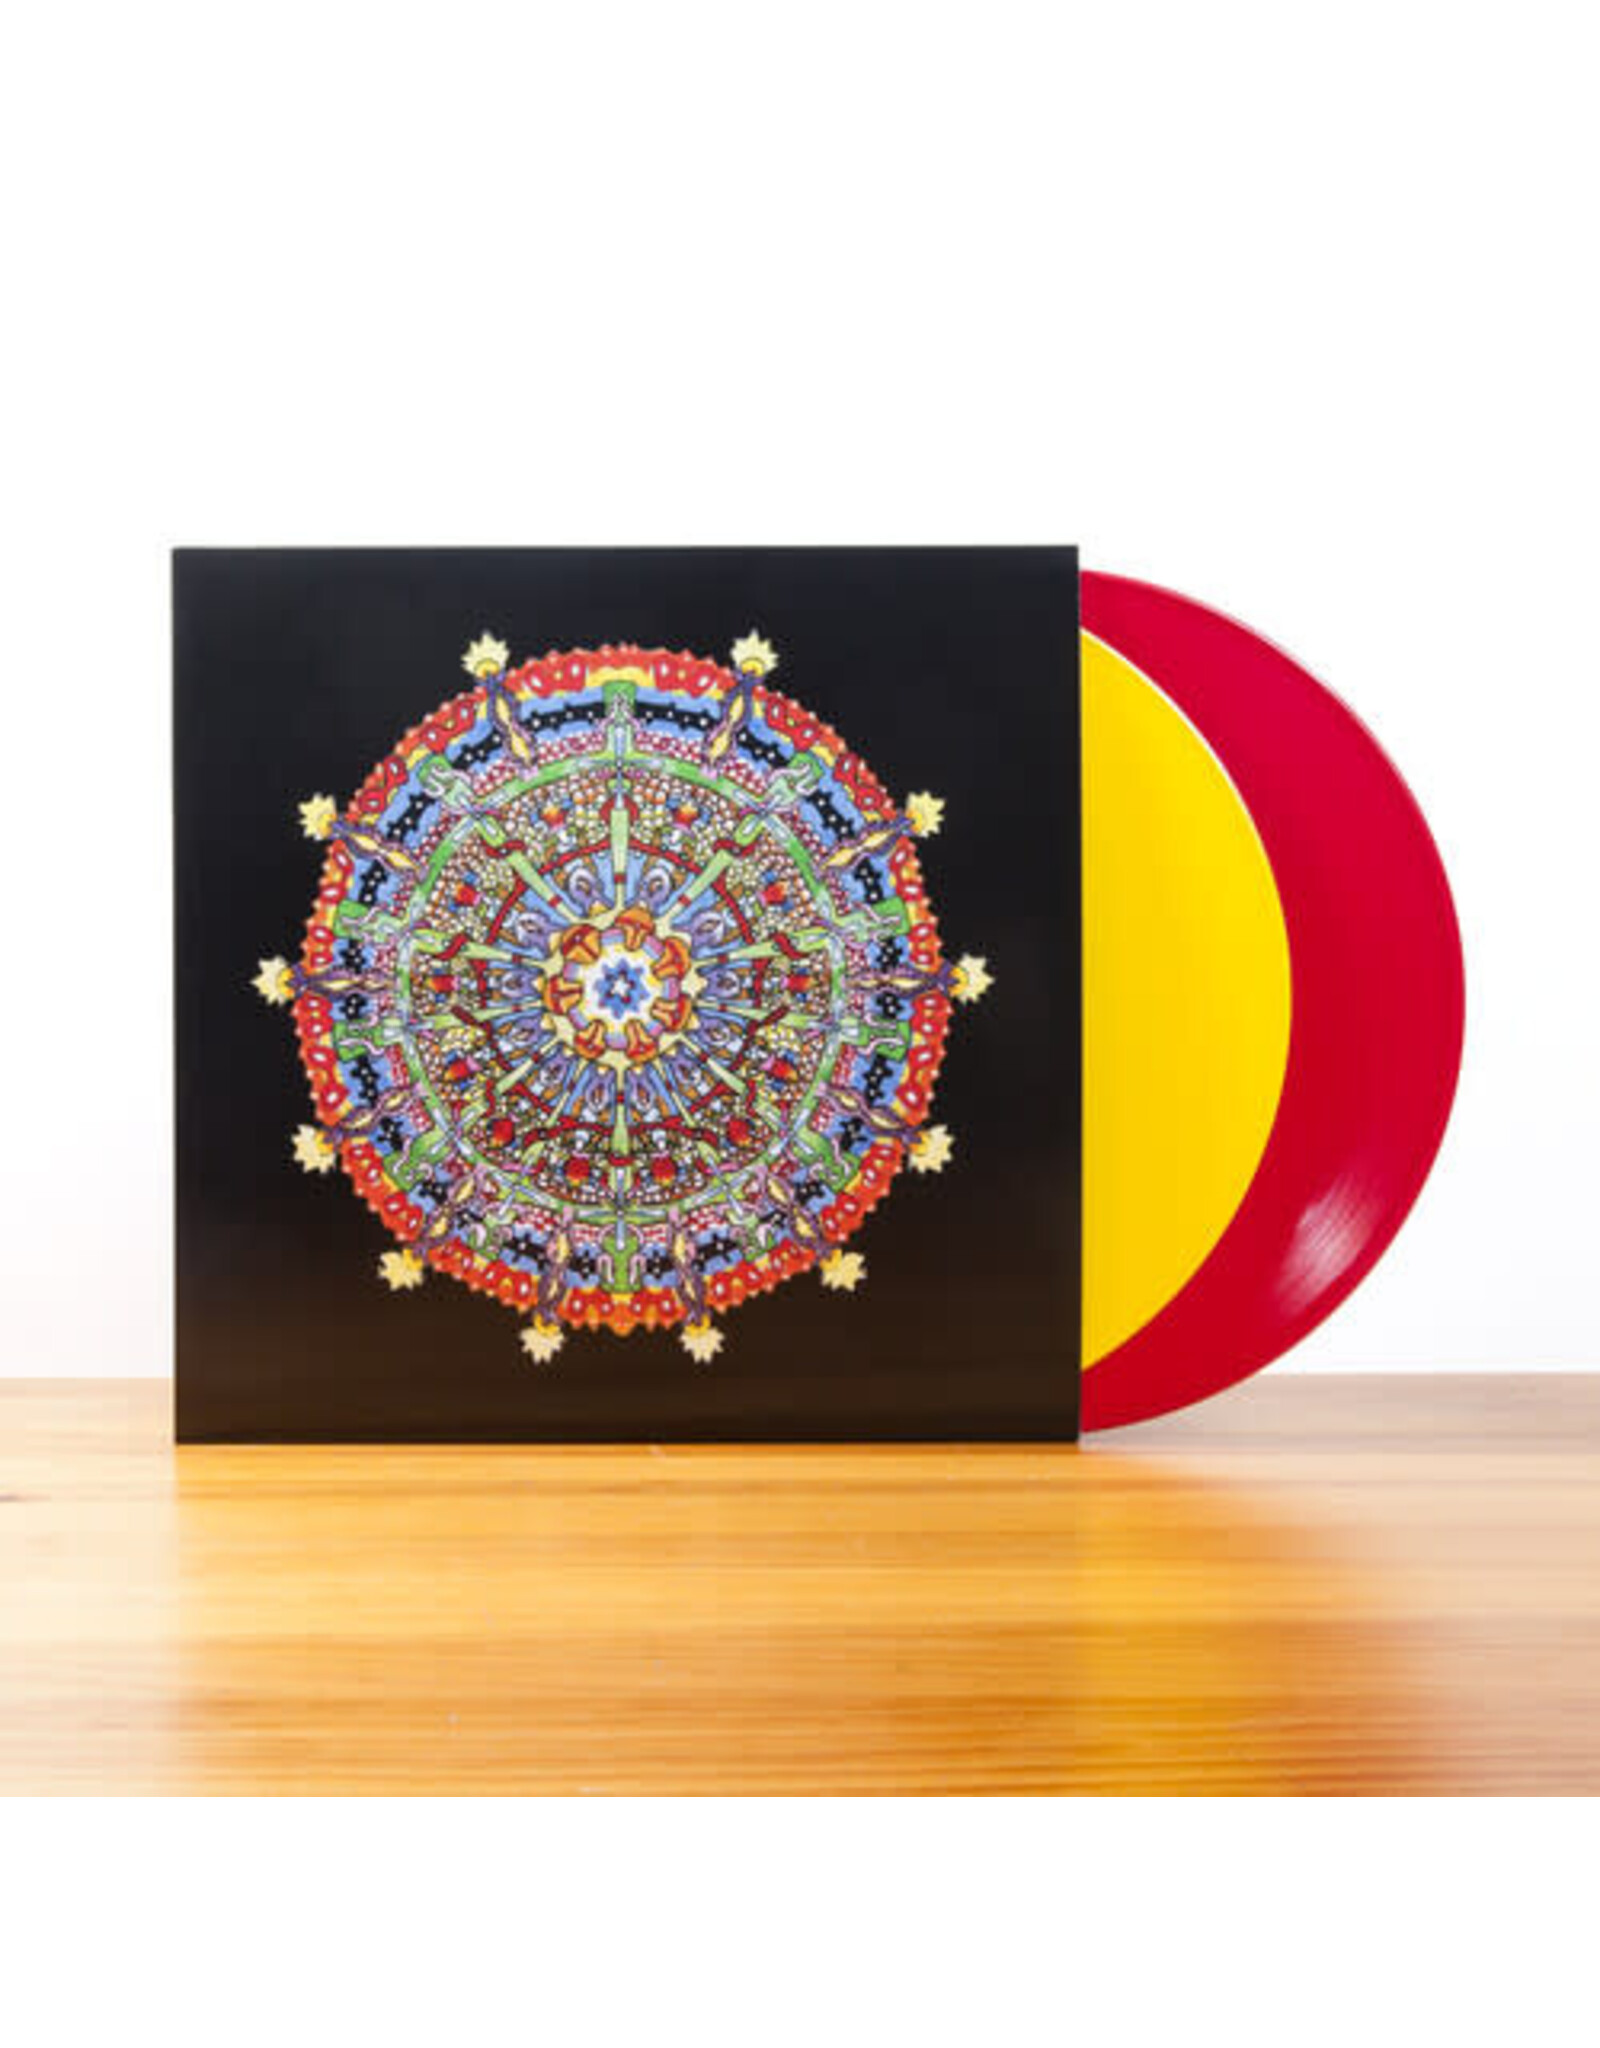 Of Montreal / Hissing Fauna, Are You The Destroyer? (red / yellow vinyl)